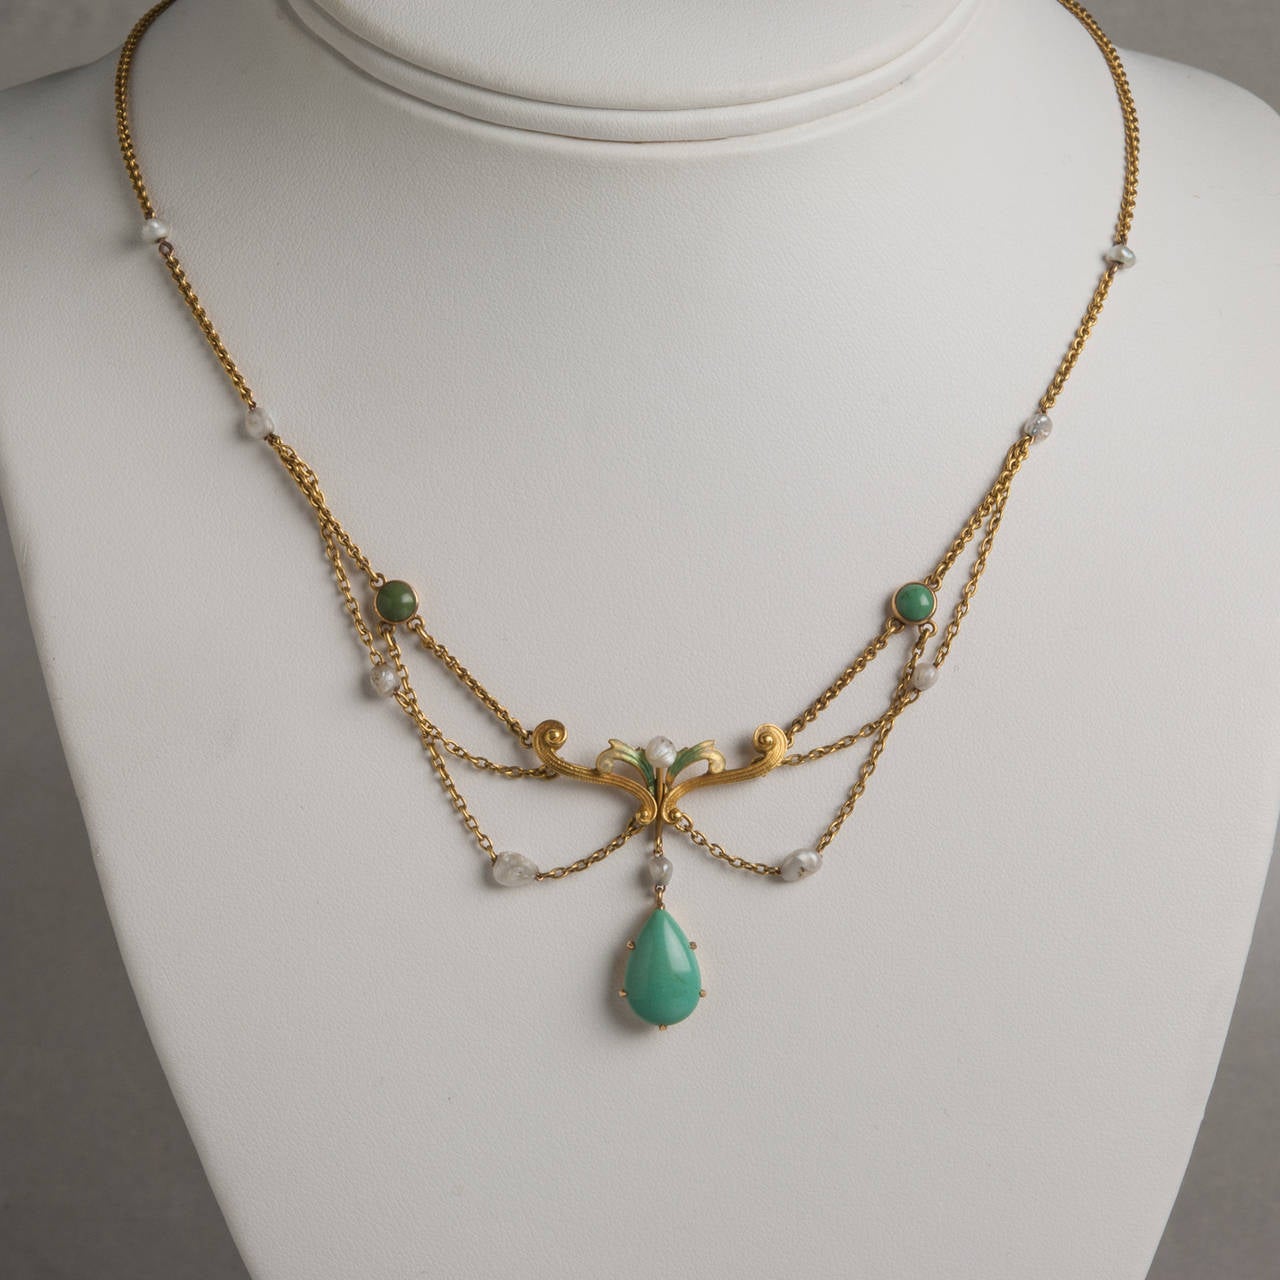 This elegant Art Nouveau necklace features enamel, turquoise and natural pearls on 14k yellow gold. Crafted circa 1915, this stunning piece exemplifies the organic, feminine aesthetic of Art Nouveau design. The necklace measures 16.5 inches.